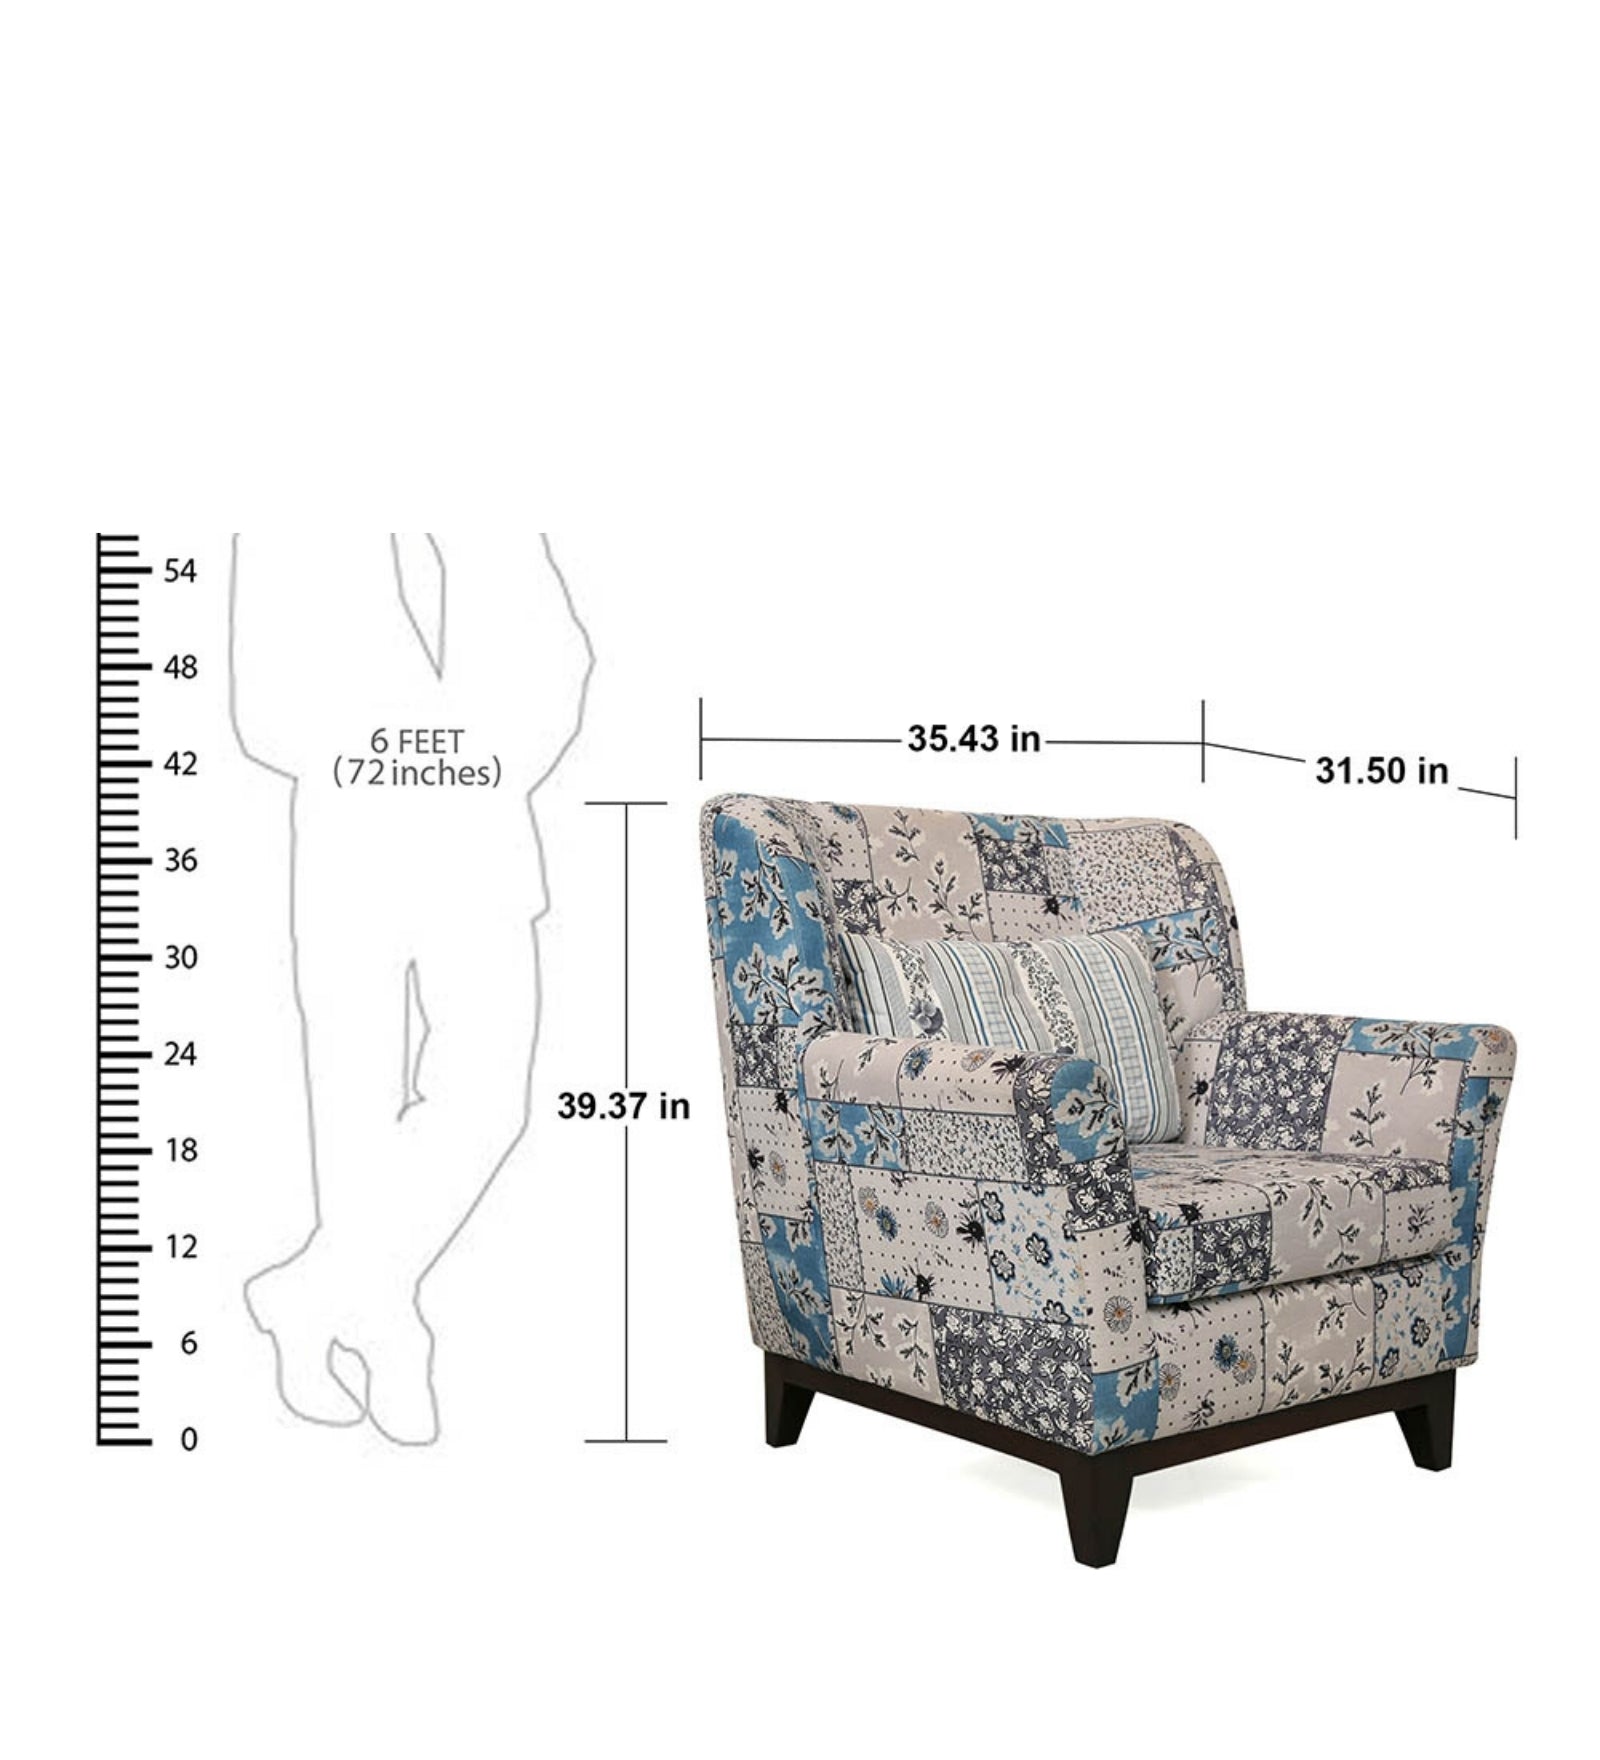 Bolton Floral Print Fabric Accent Chair in Multi Colour